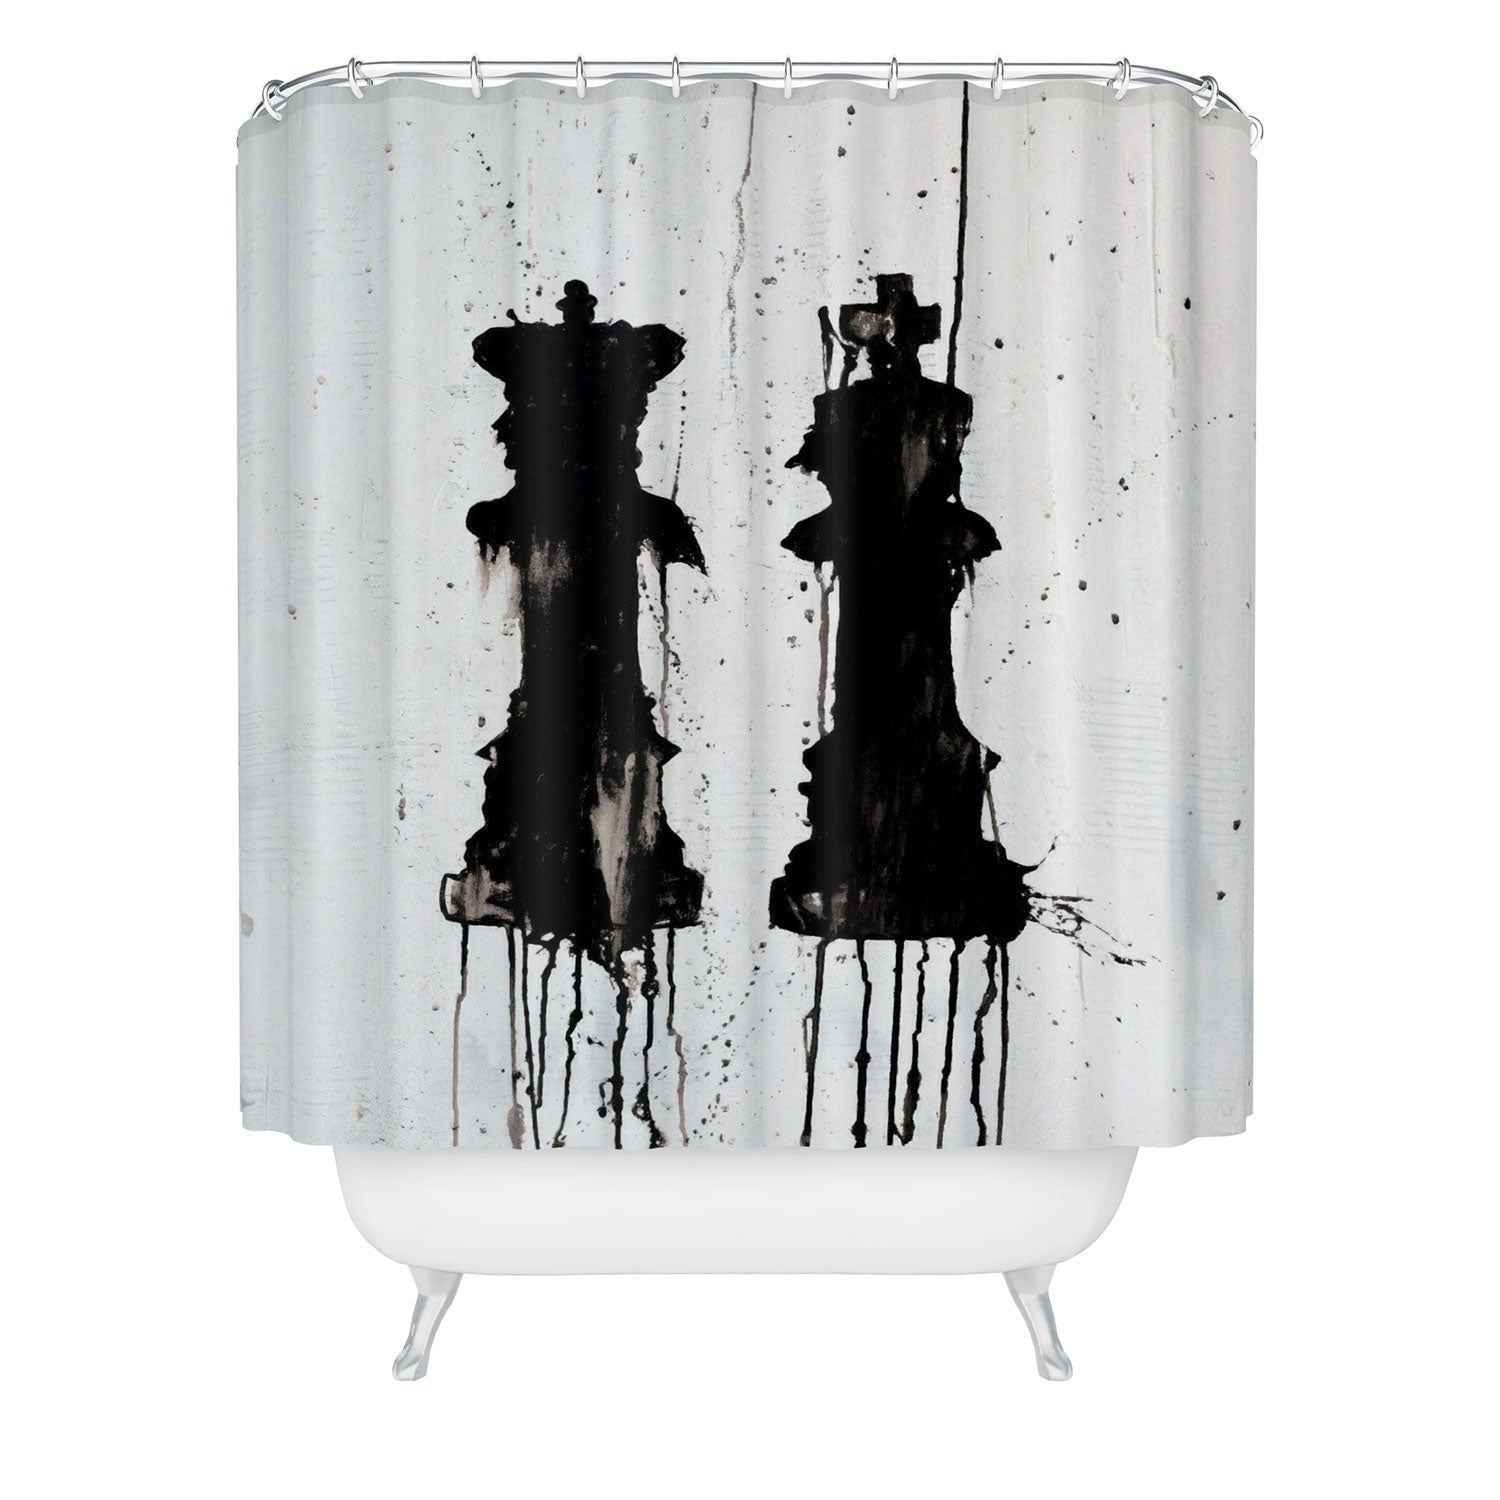 "king and queen" shower curtain